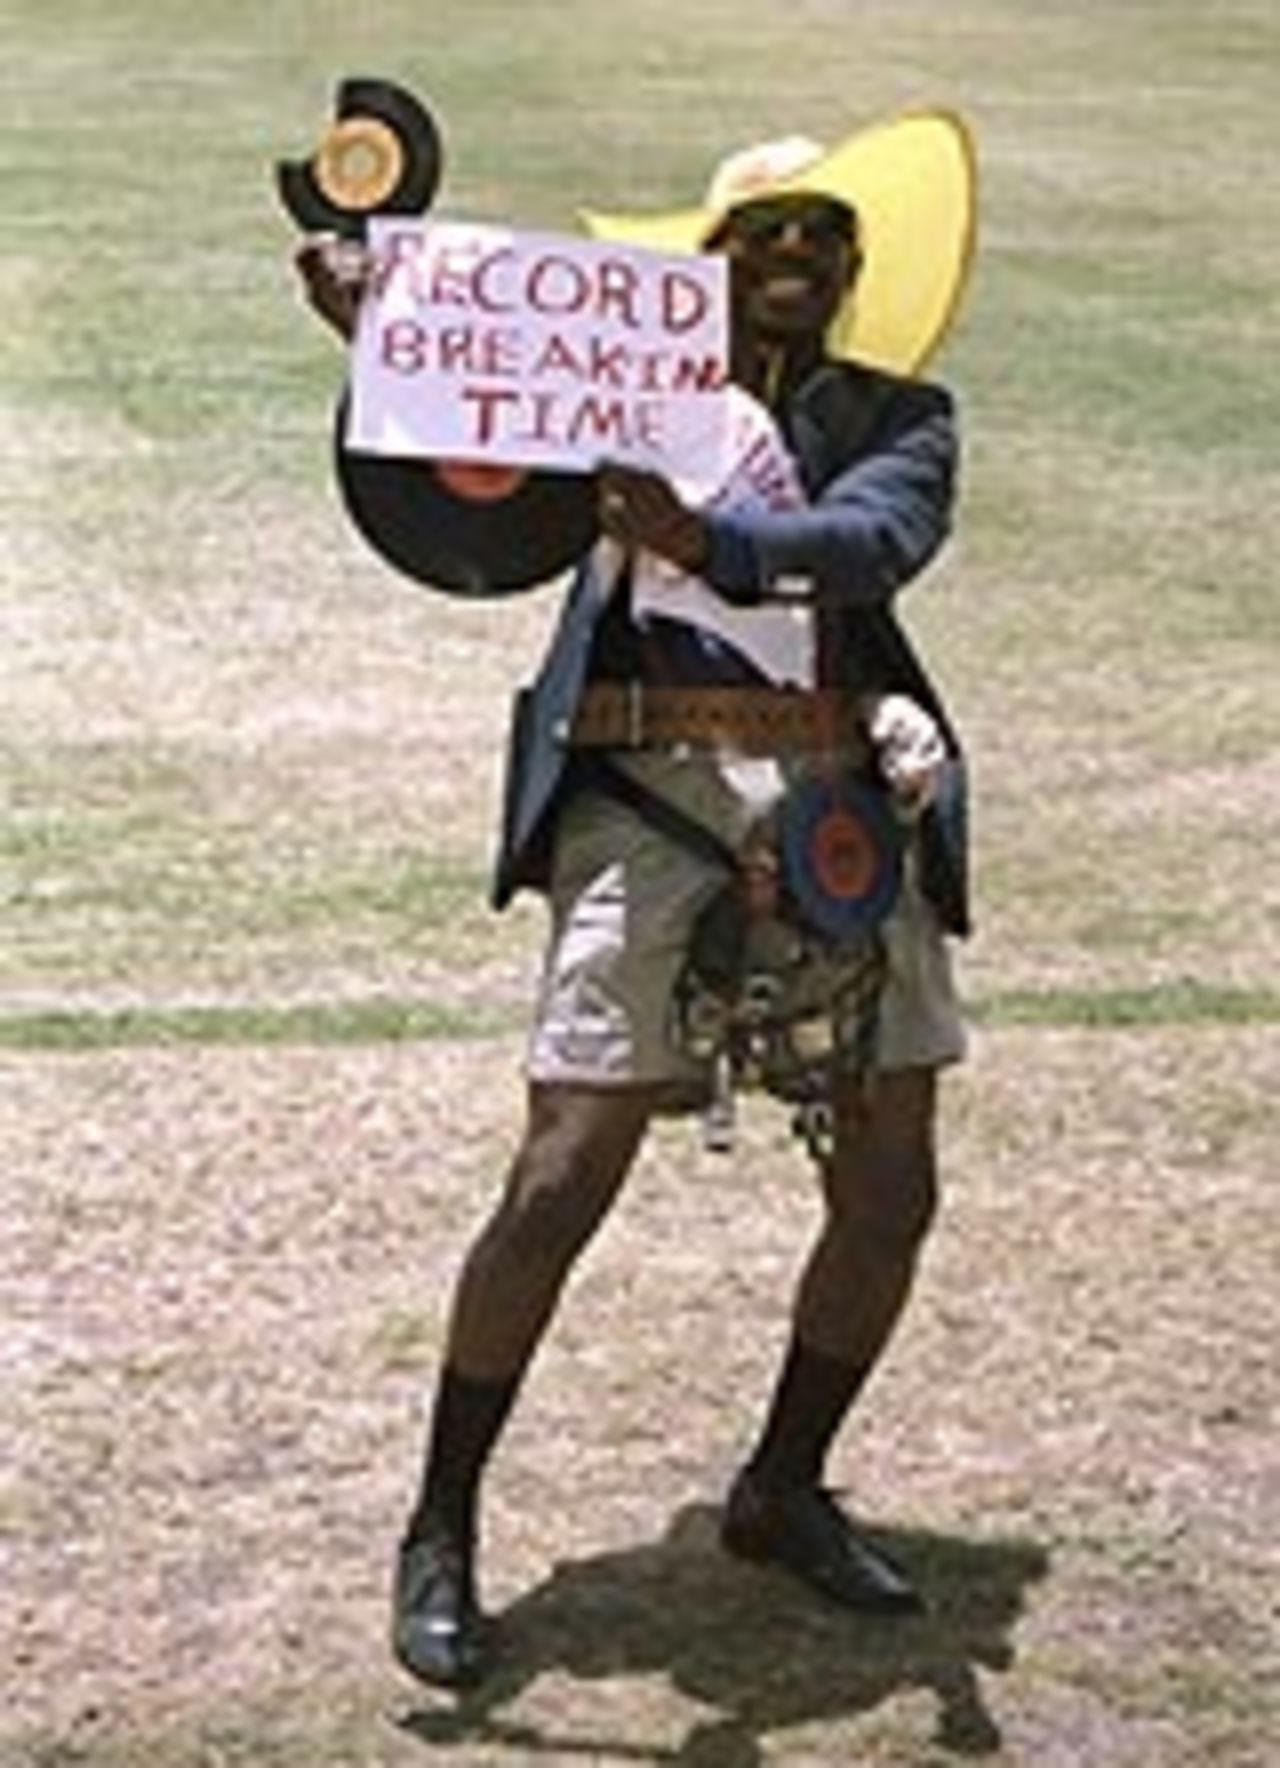 Record-breaking time, England v West Indies, Antigua, April 18, 1994